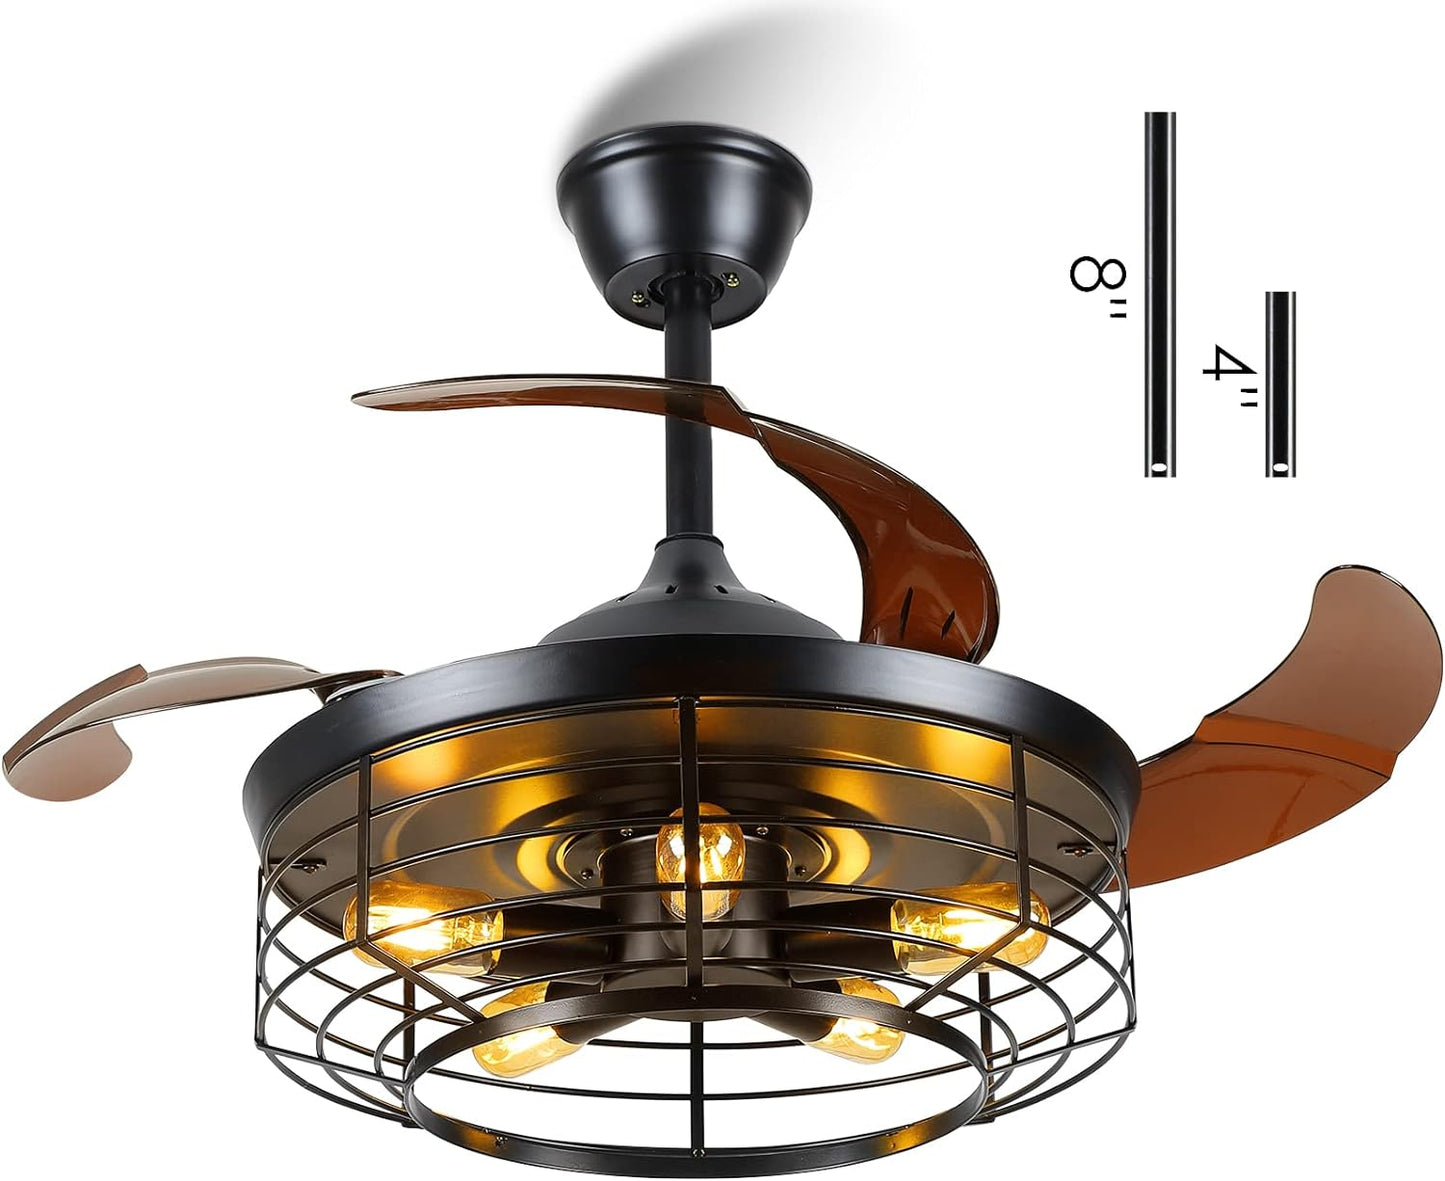 Asyko Retractable Ceiling Fans with Lights and Remote-Caged Farmhouse Ceiling Fan Lights Black, Rustic Industrial Ceiling Fan with Light for Patio Living Room Bedroom42'' Bulb Included (Black-7